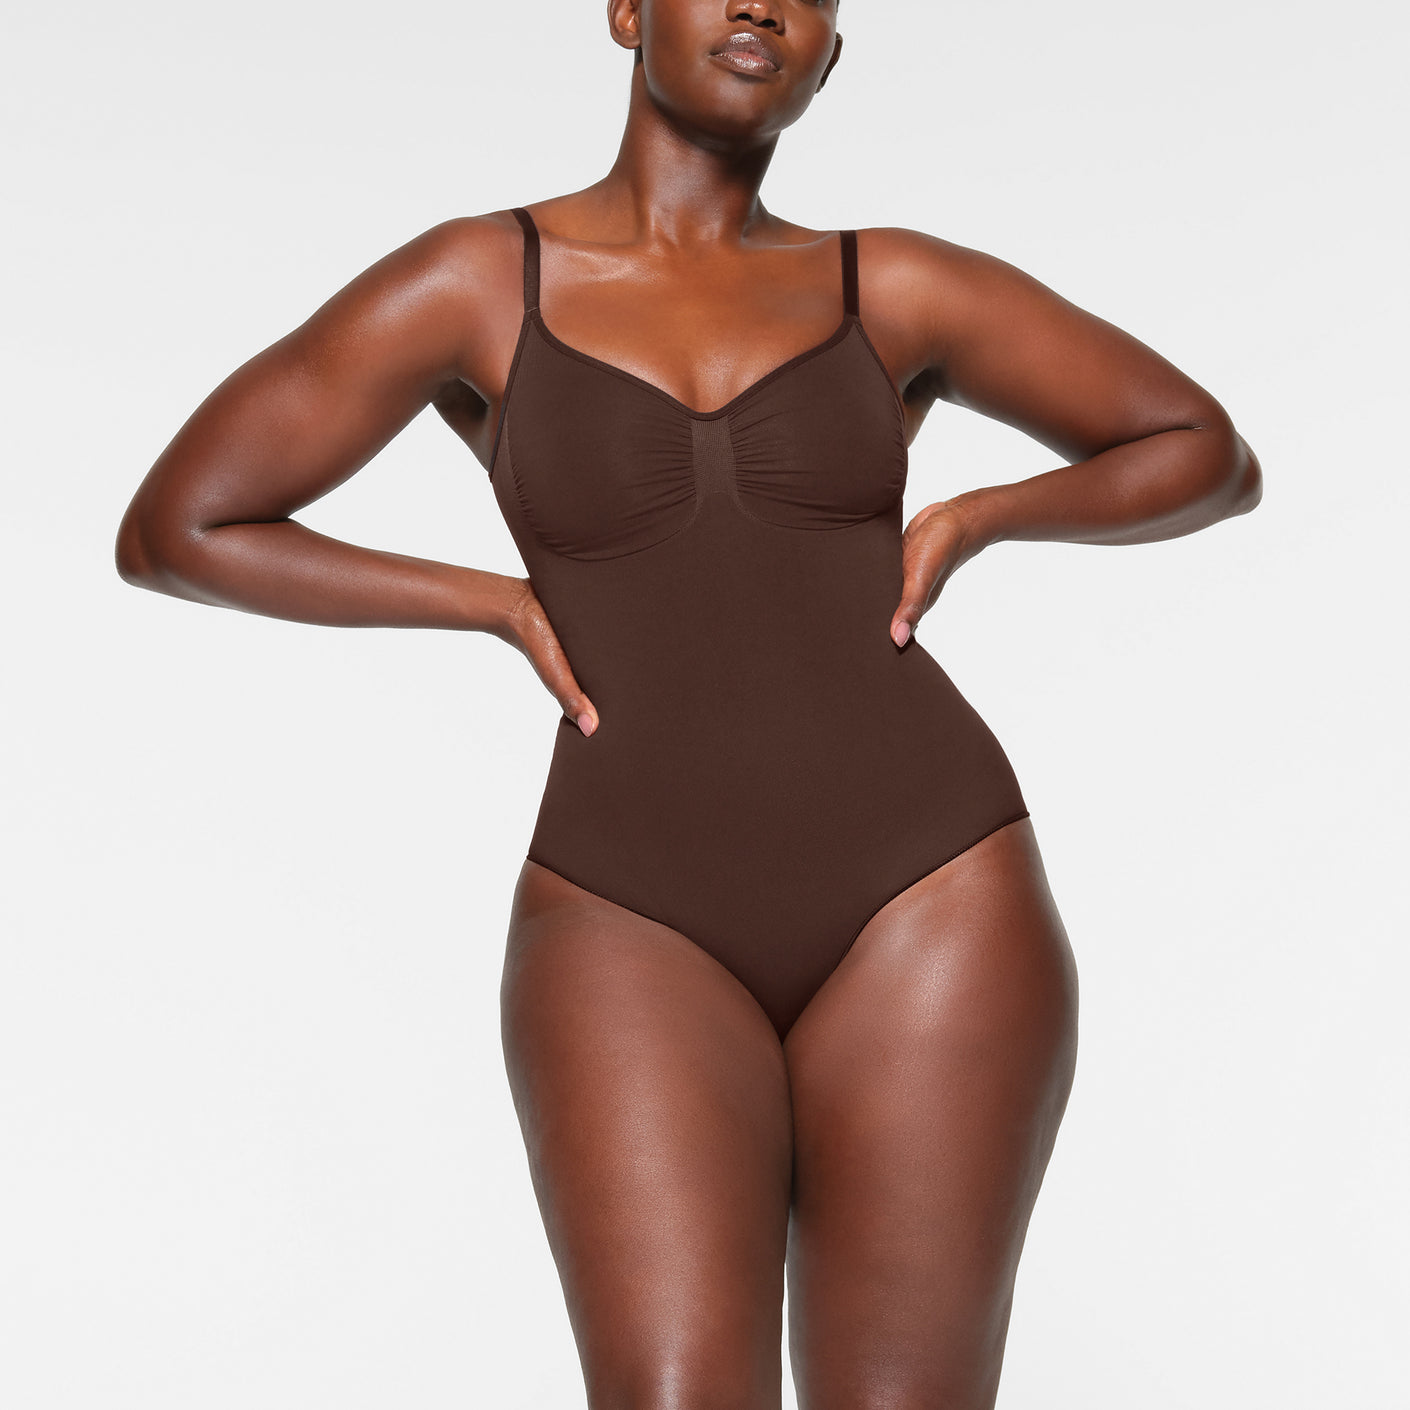 I bought the viral Skims bodysuit in a size XL - it looks tiny but